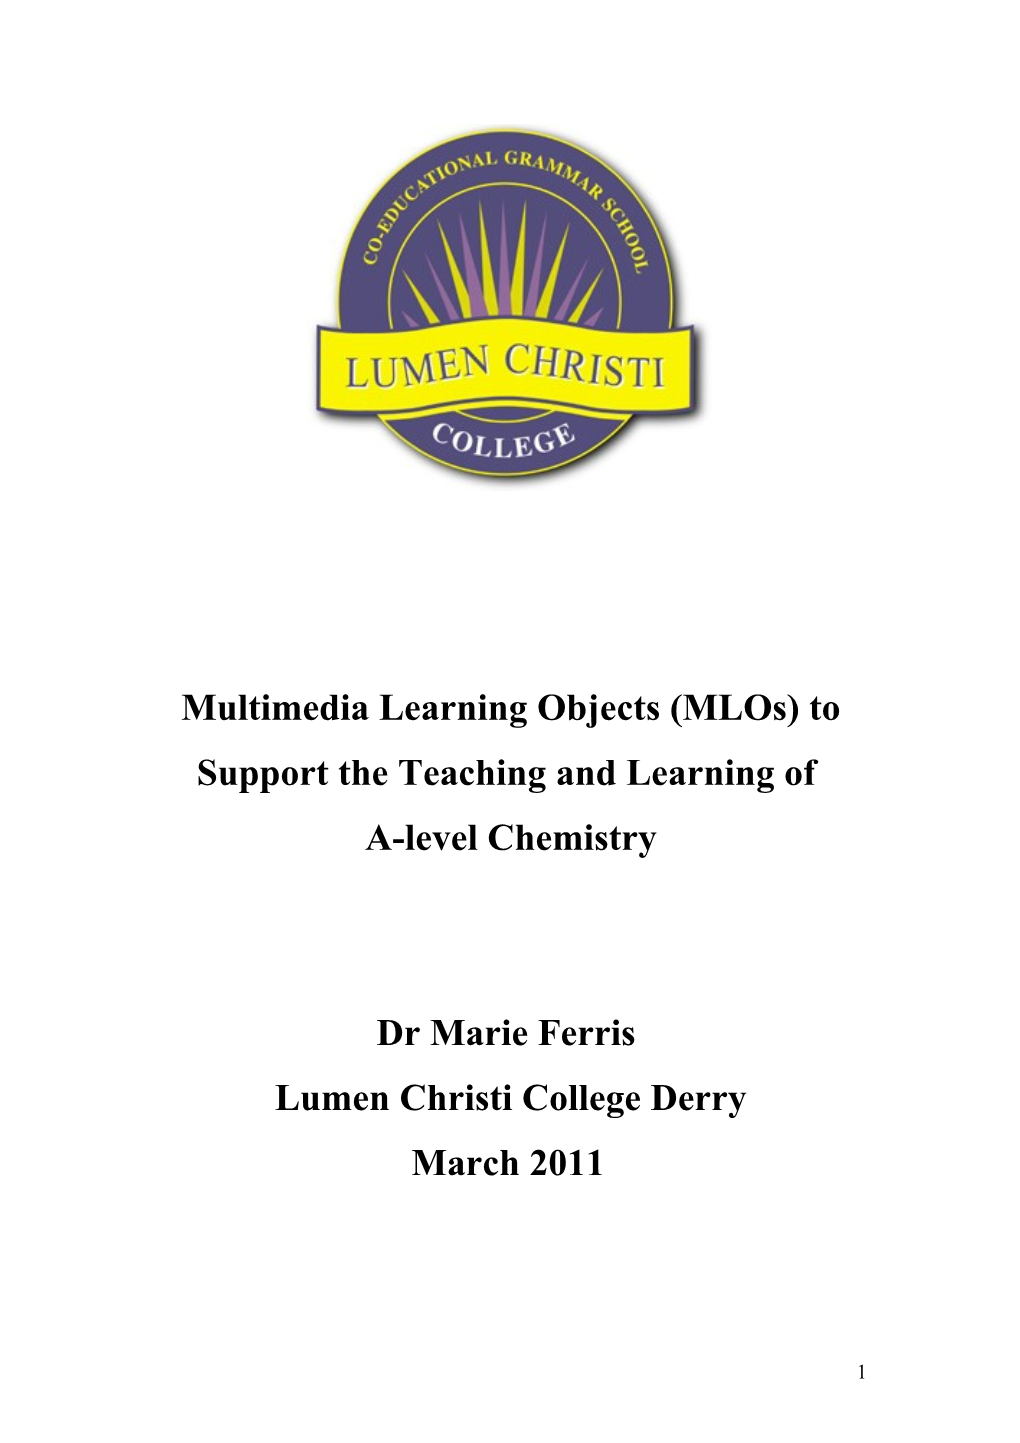 Multimedia Learning Objects (Mlos) to Support the Teaching and Learning Of